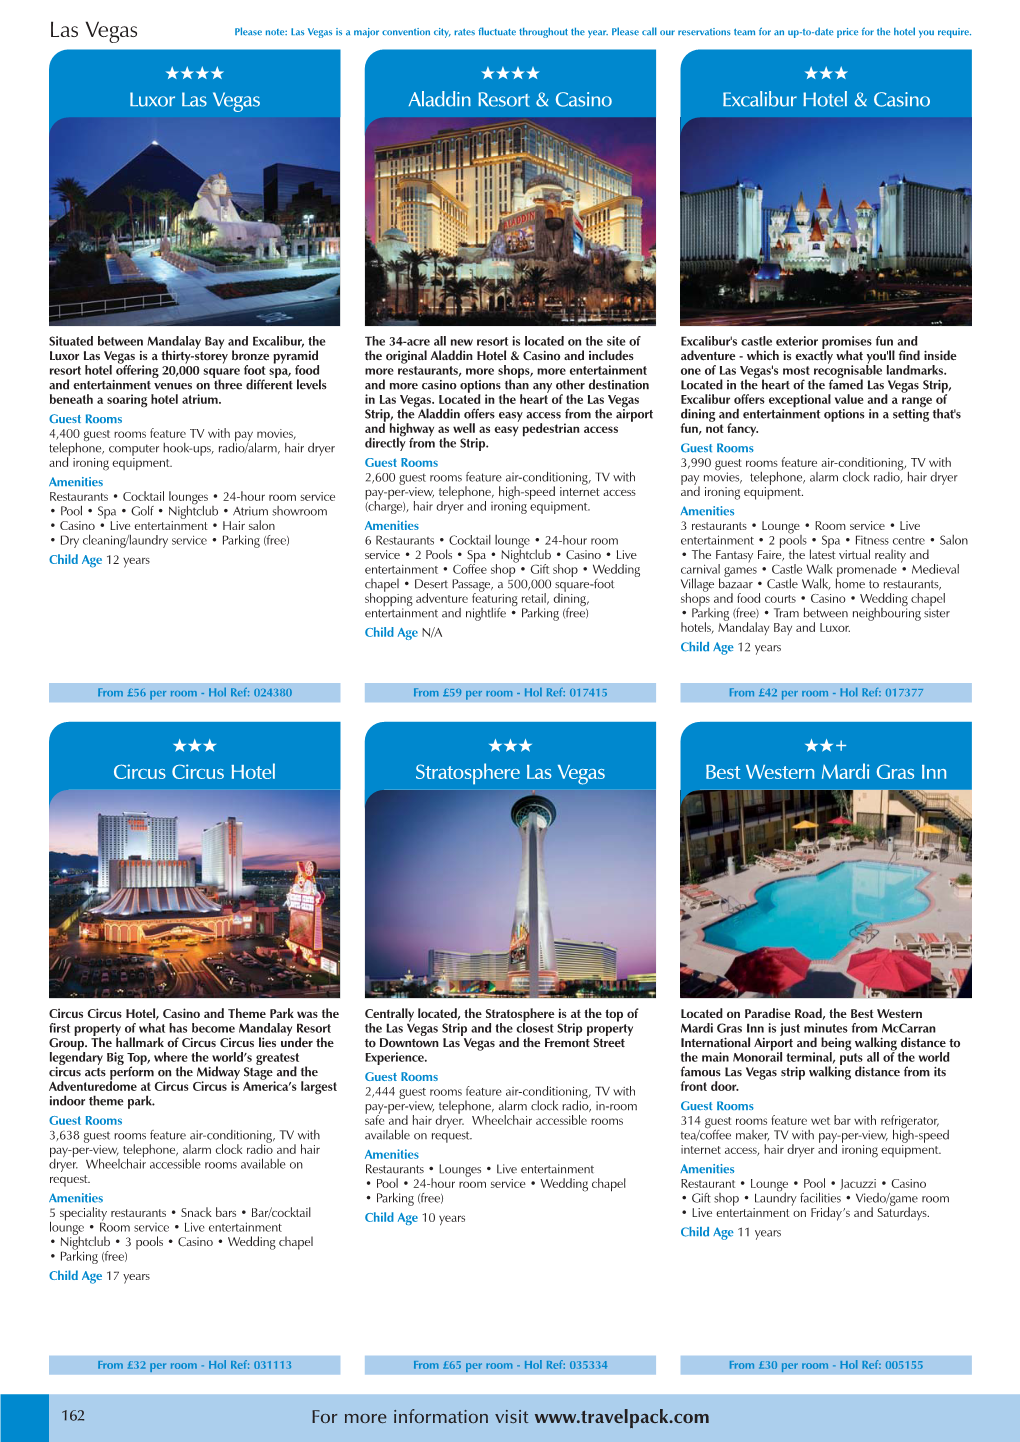 Las Vegas Please Note: Las Vegas Is a Major Convention City, Rates Fluctuate Throughout the Year